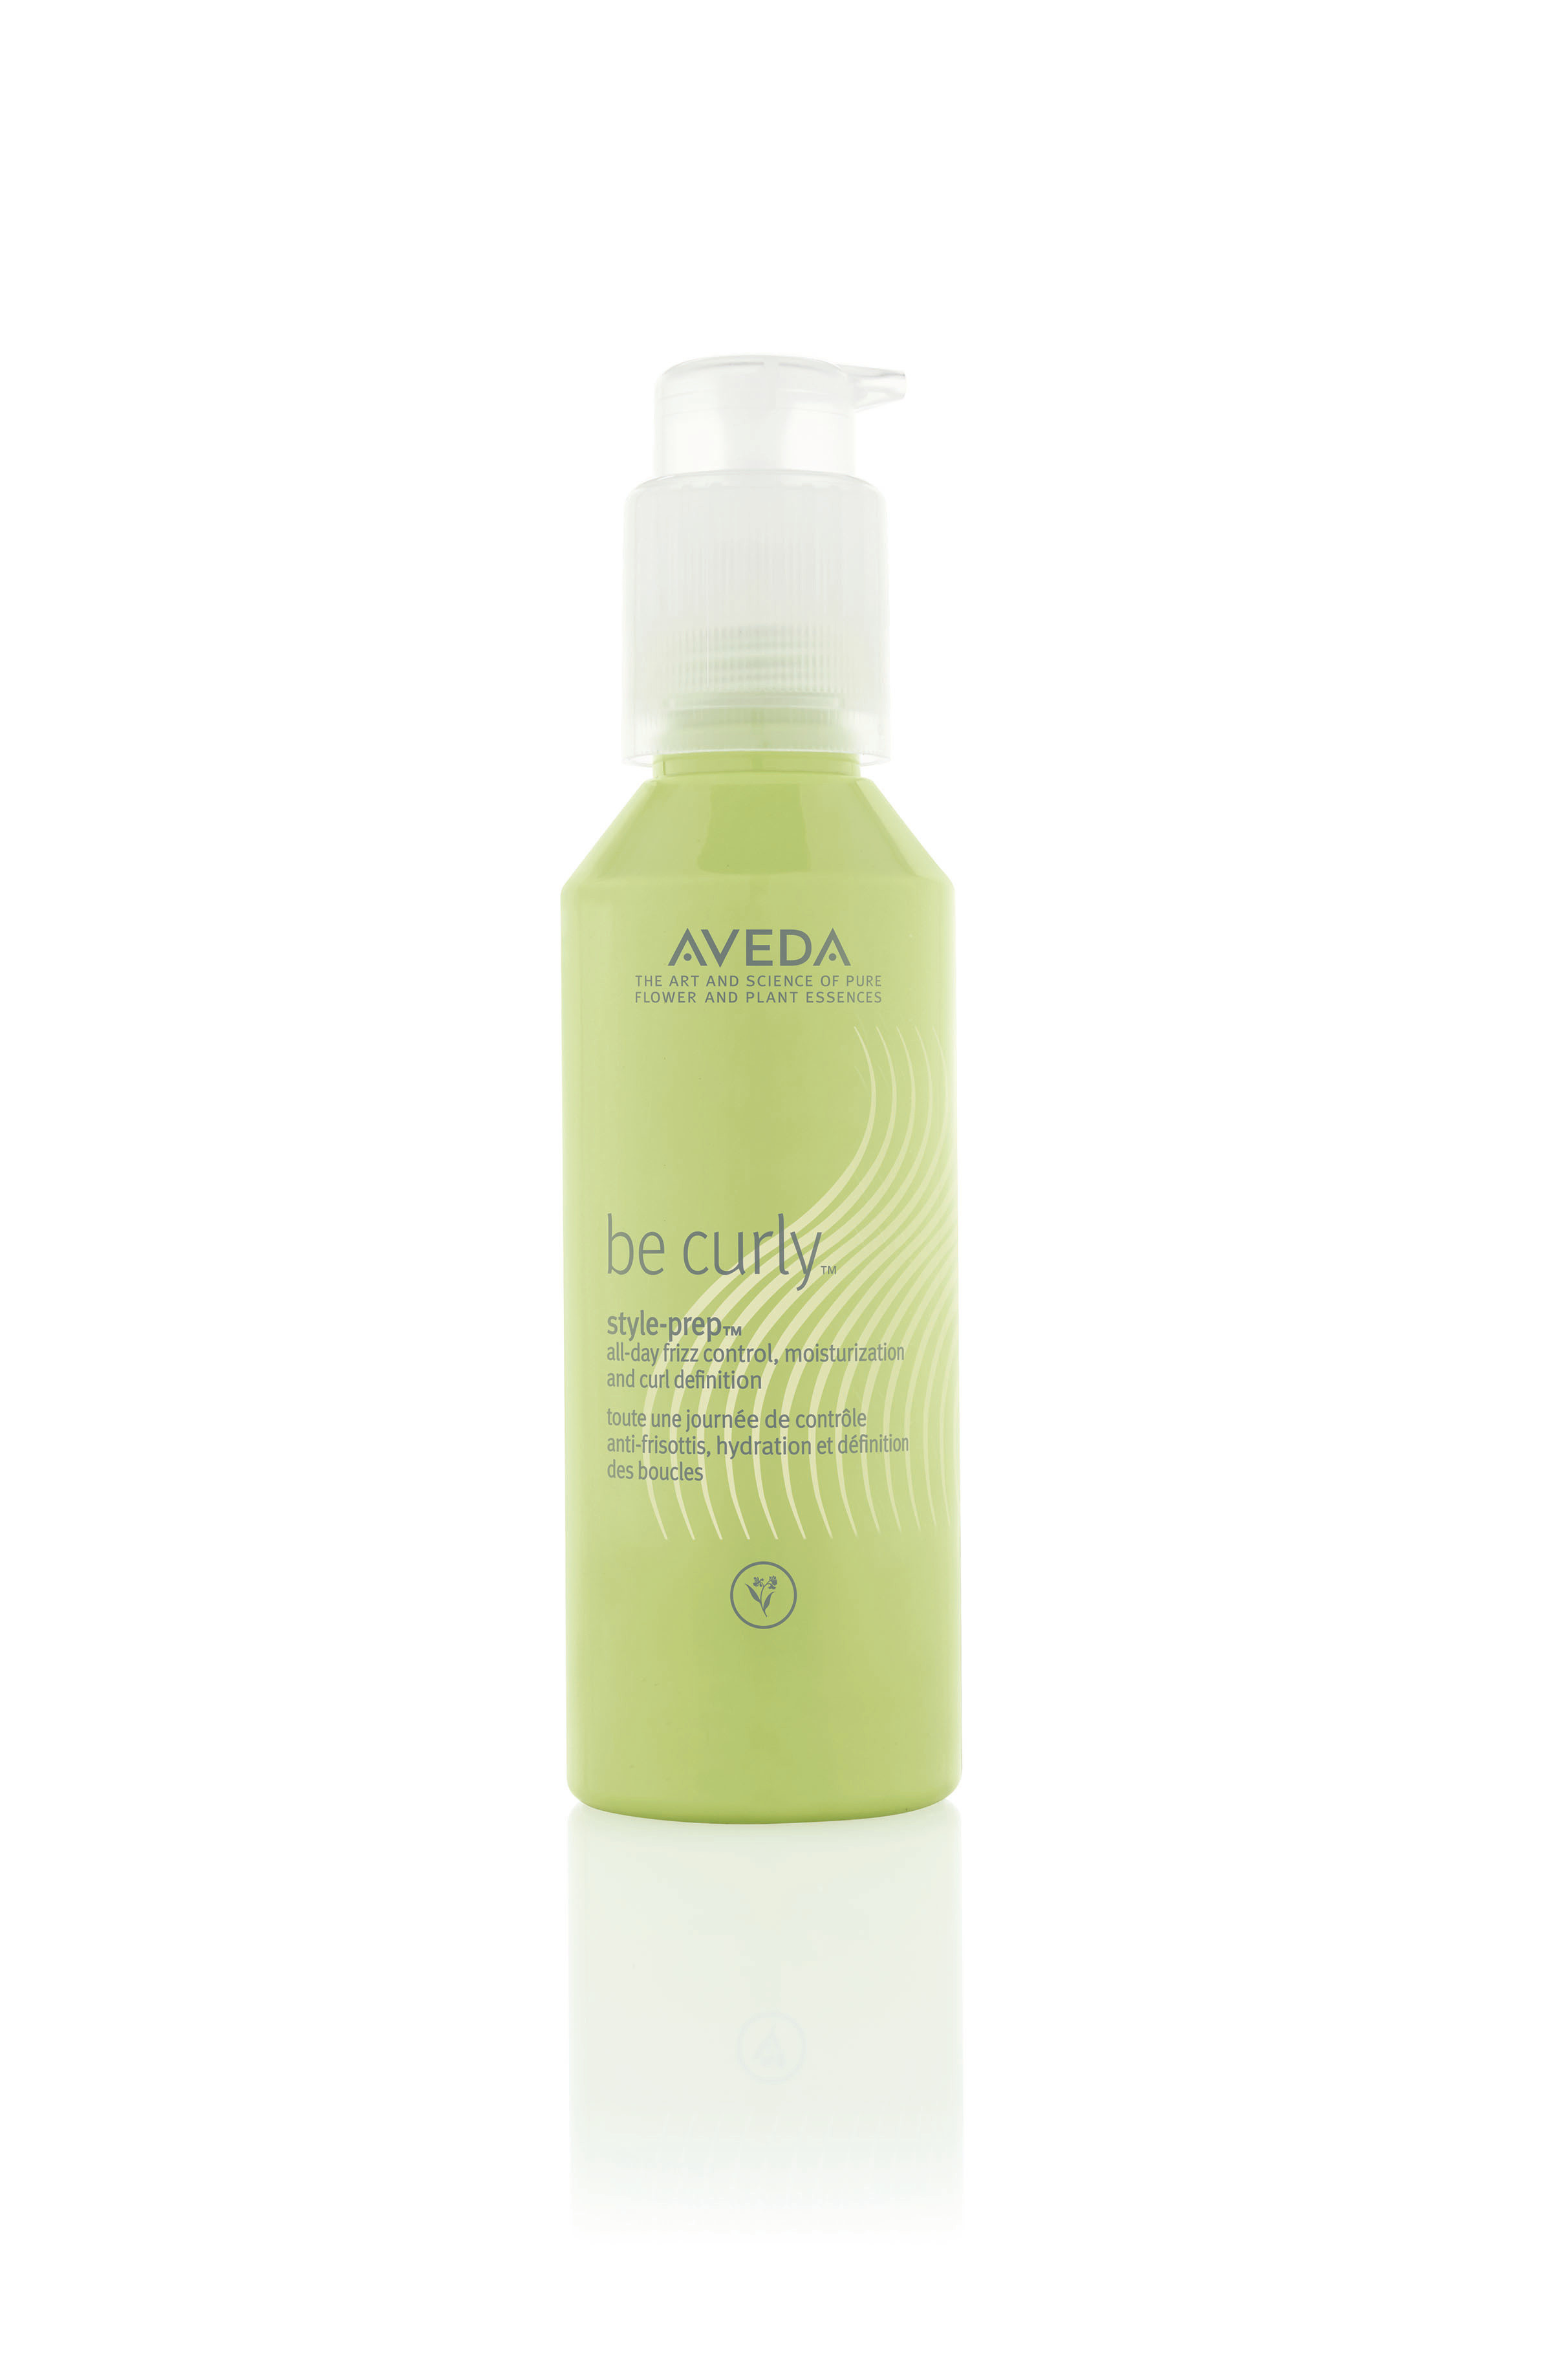 Aveda be curly style prep 100 ml, Verde, large image number 0